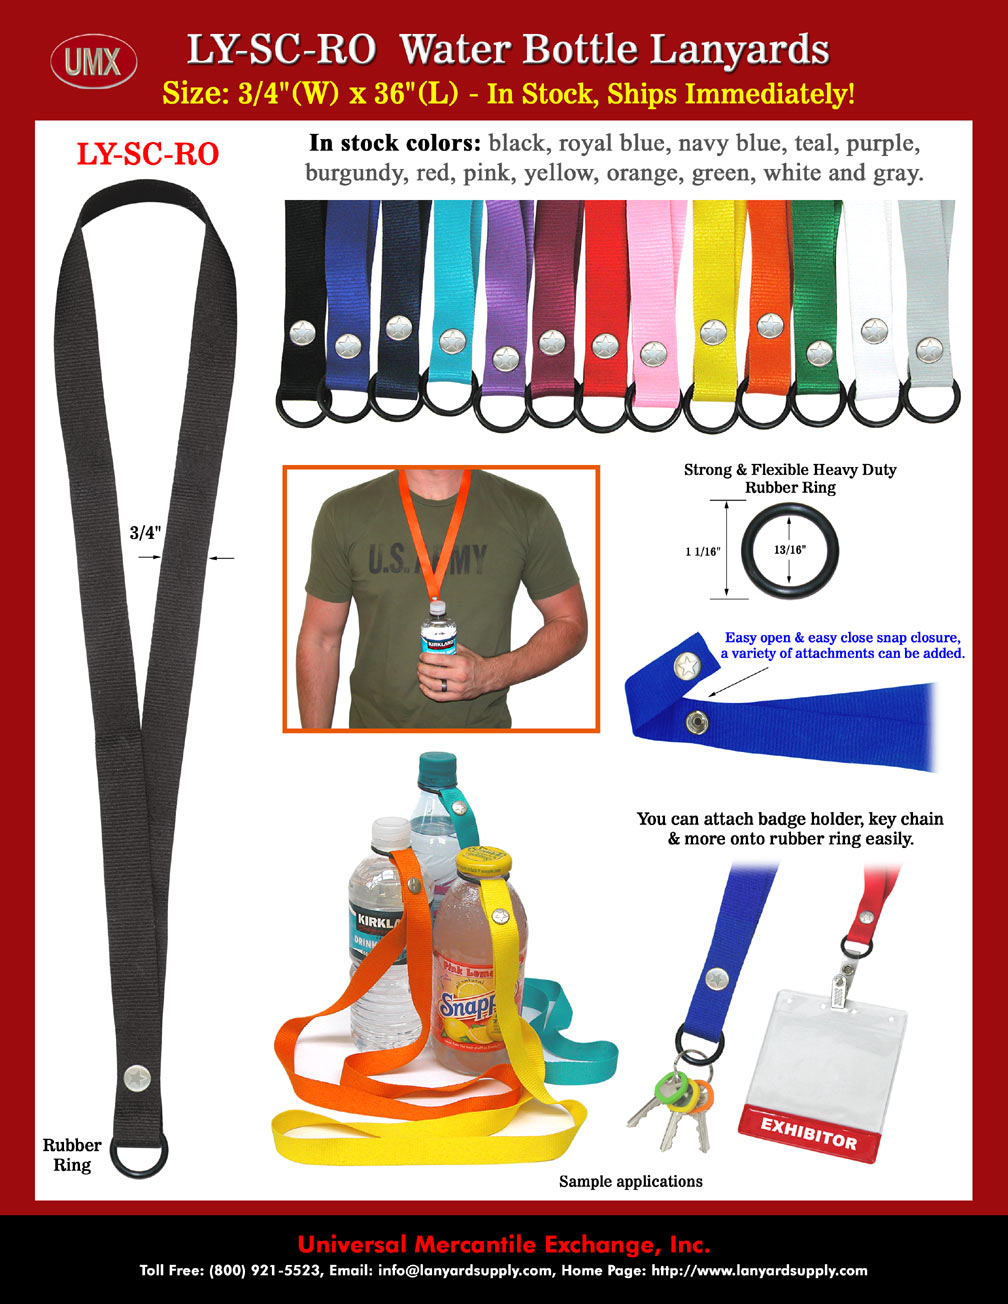 Great Bottle Cap or Bottle  Lanyards For Carrying Bottle Drinks, Name Badges Or You Key Chains.